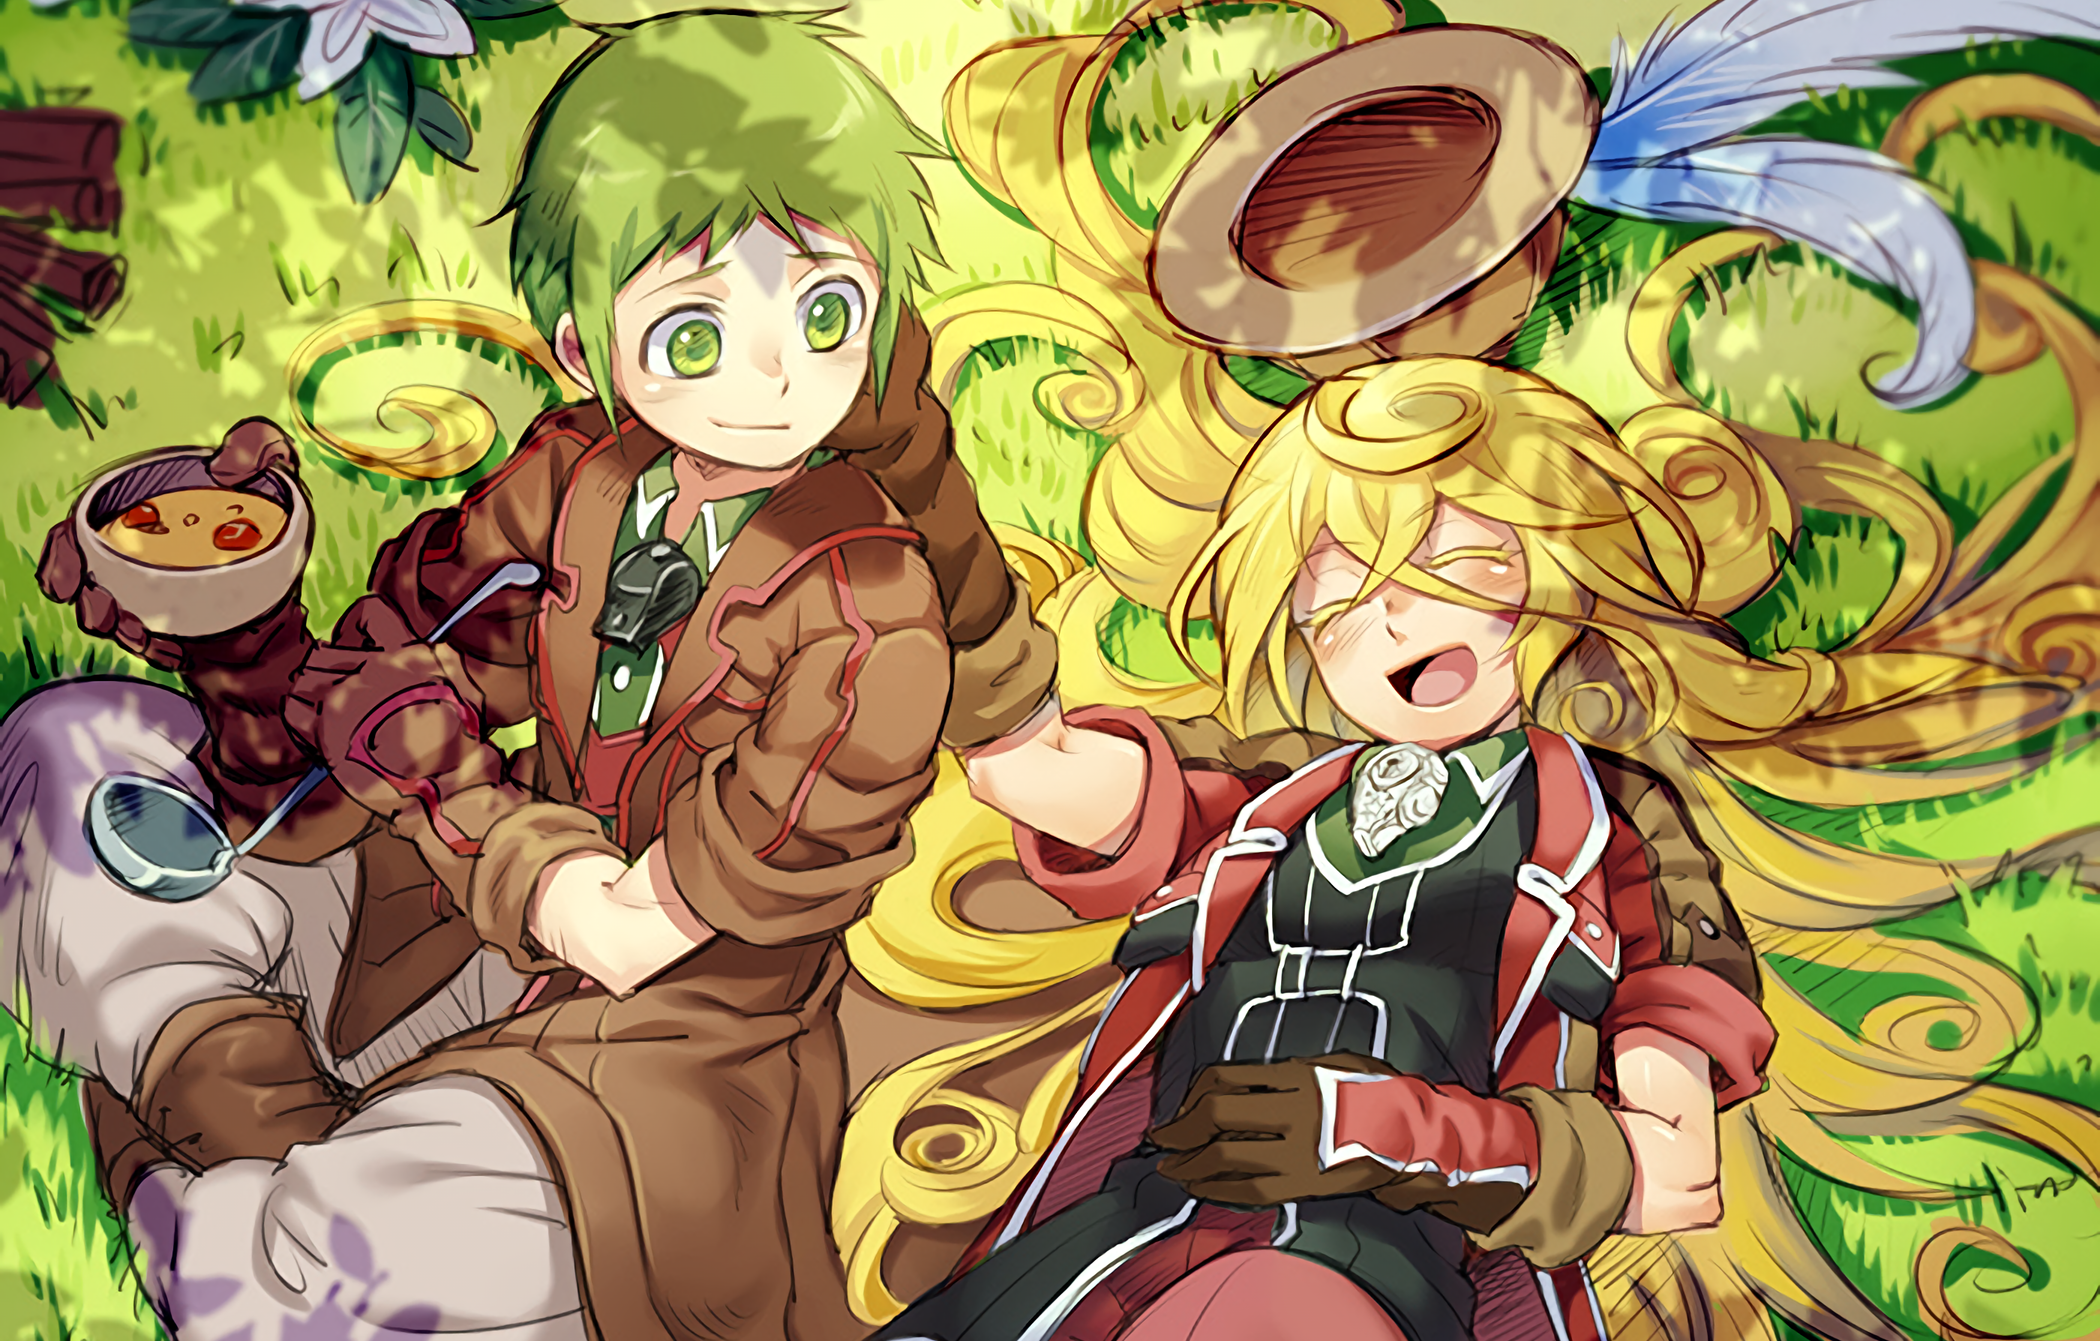 Lyza Made In Abyss Torka Made In Abyss 2100x1341